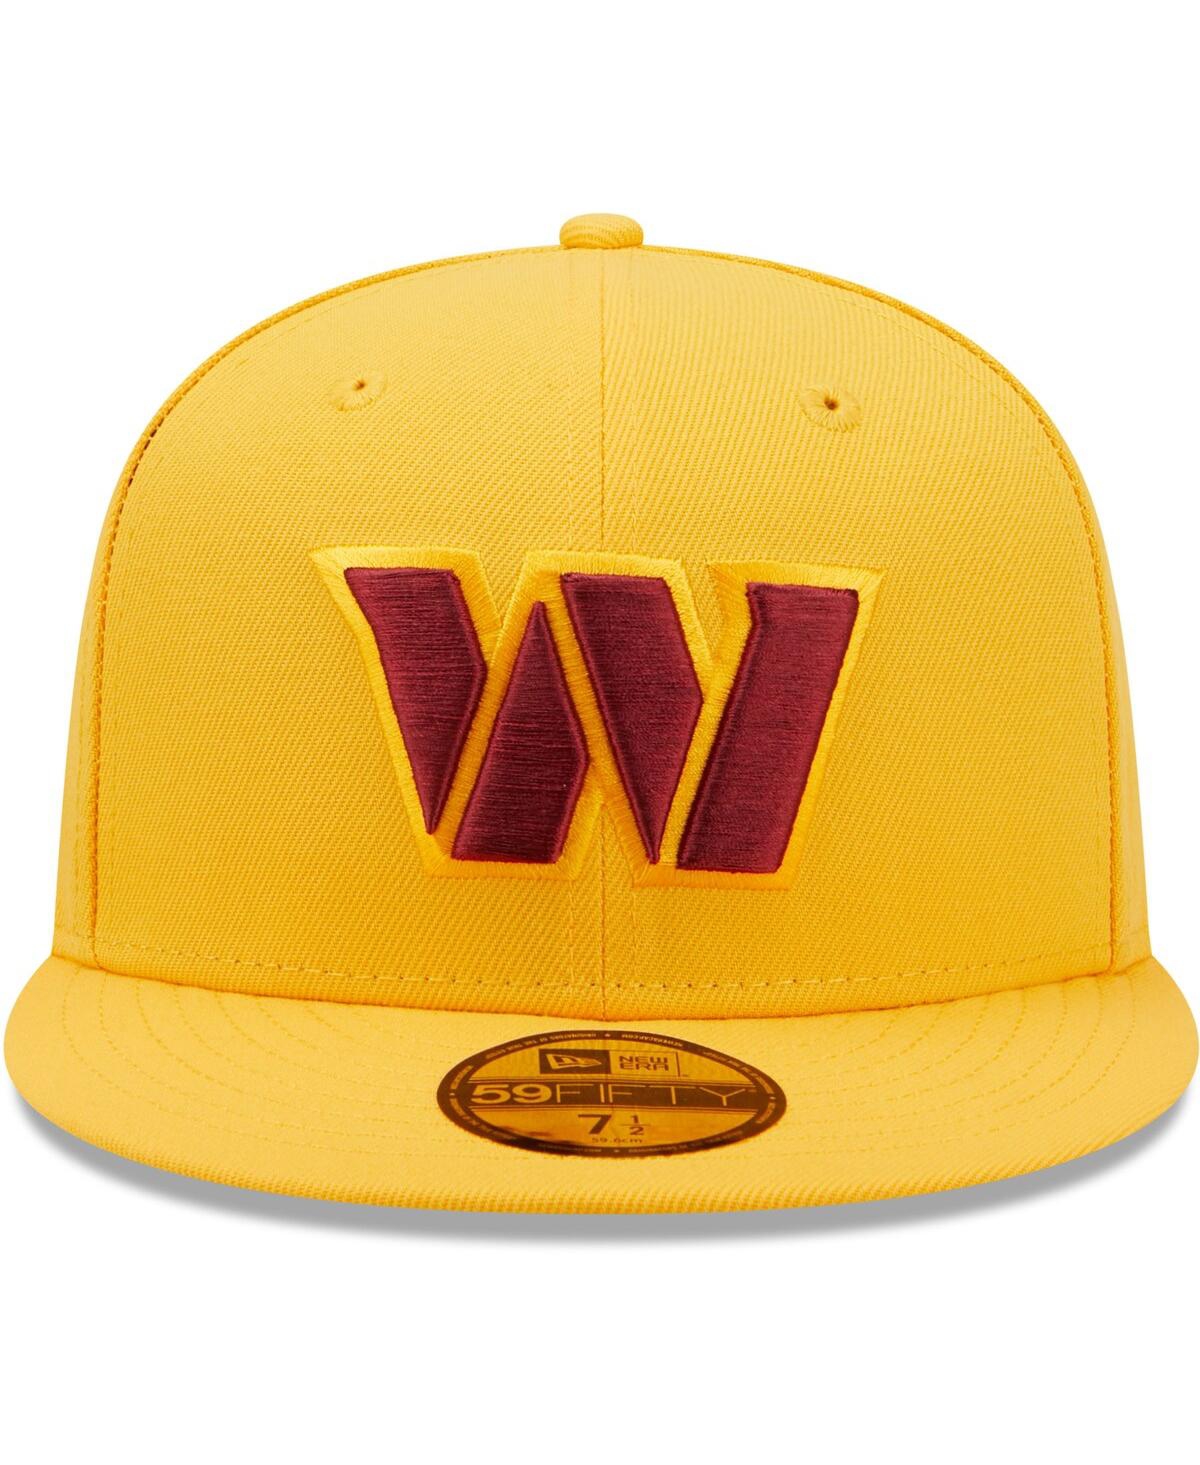 Shop New Era Men's  Gold Washington Commanders Omaha 59fifty Fitted Hat